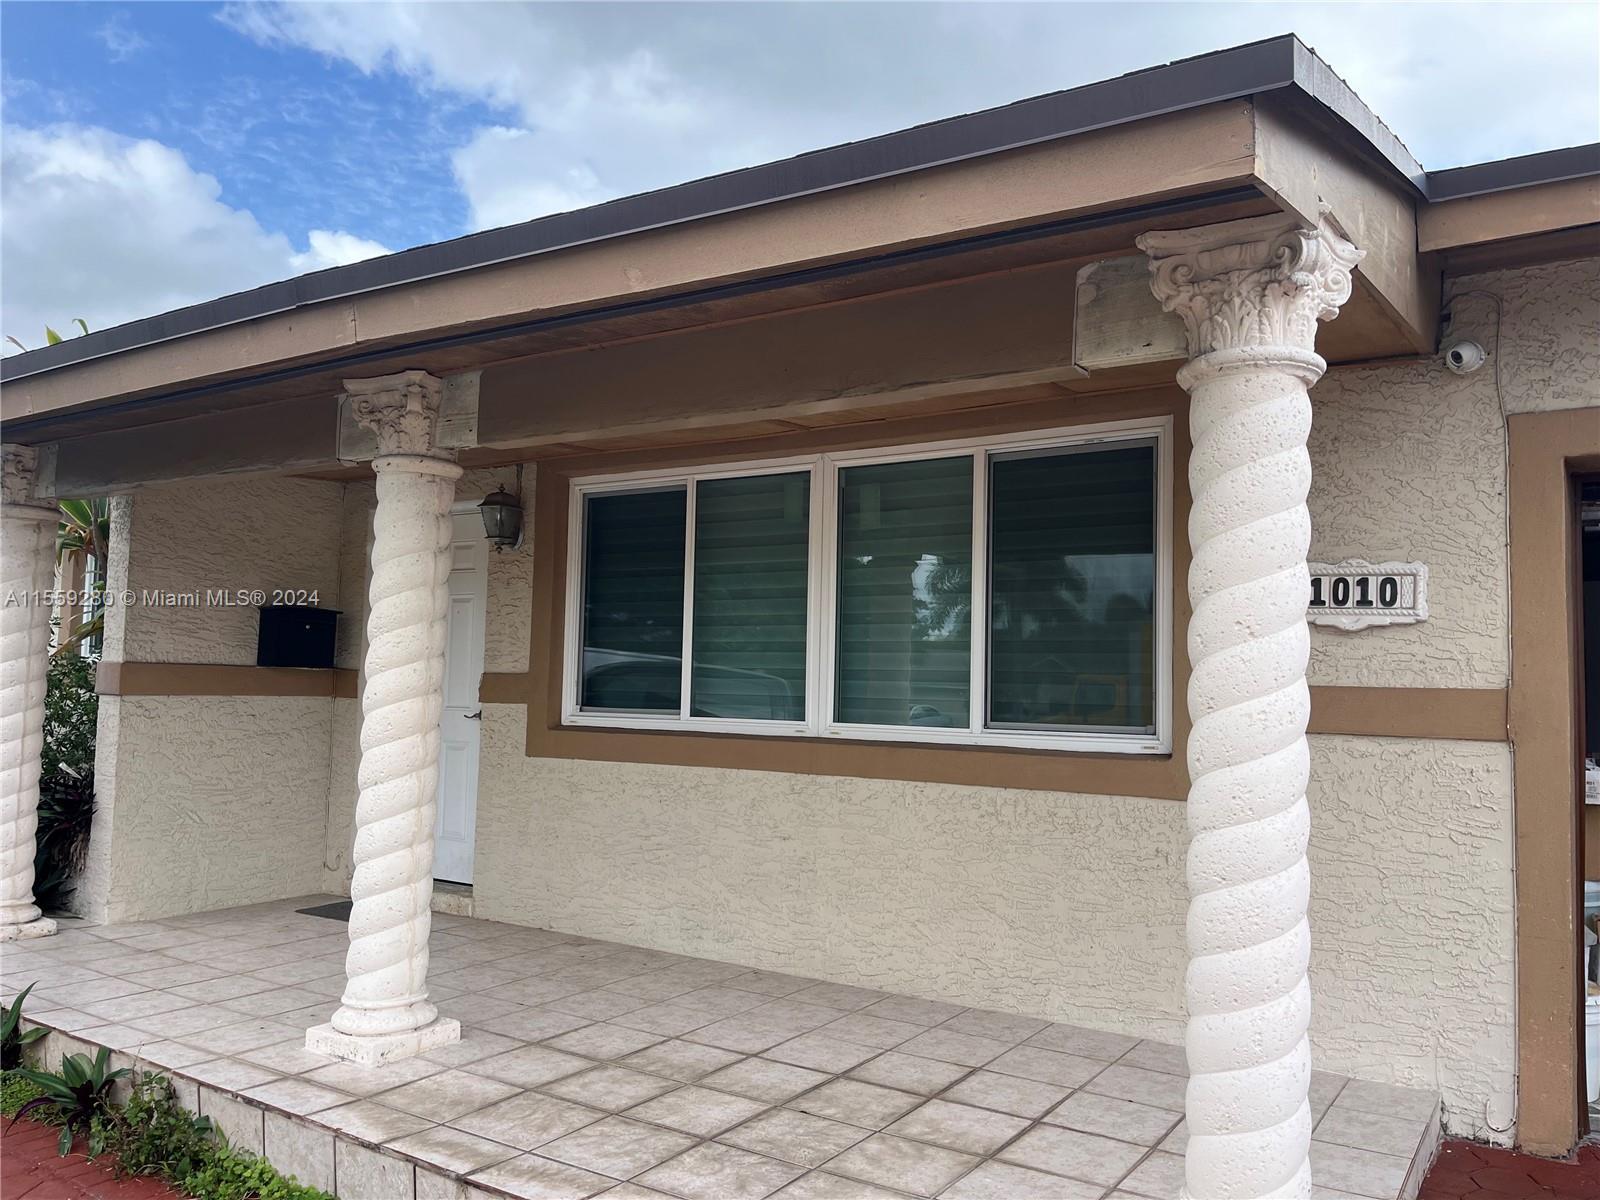 Photo of 1010 NW 199th St in Miami Gardens, FL